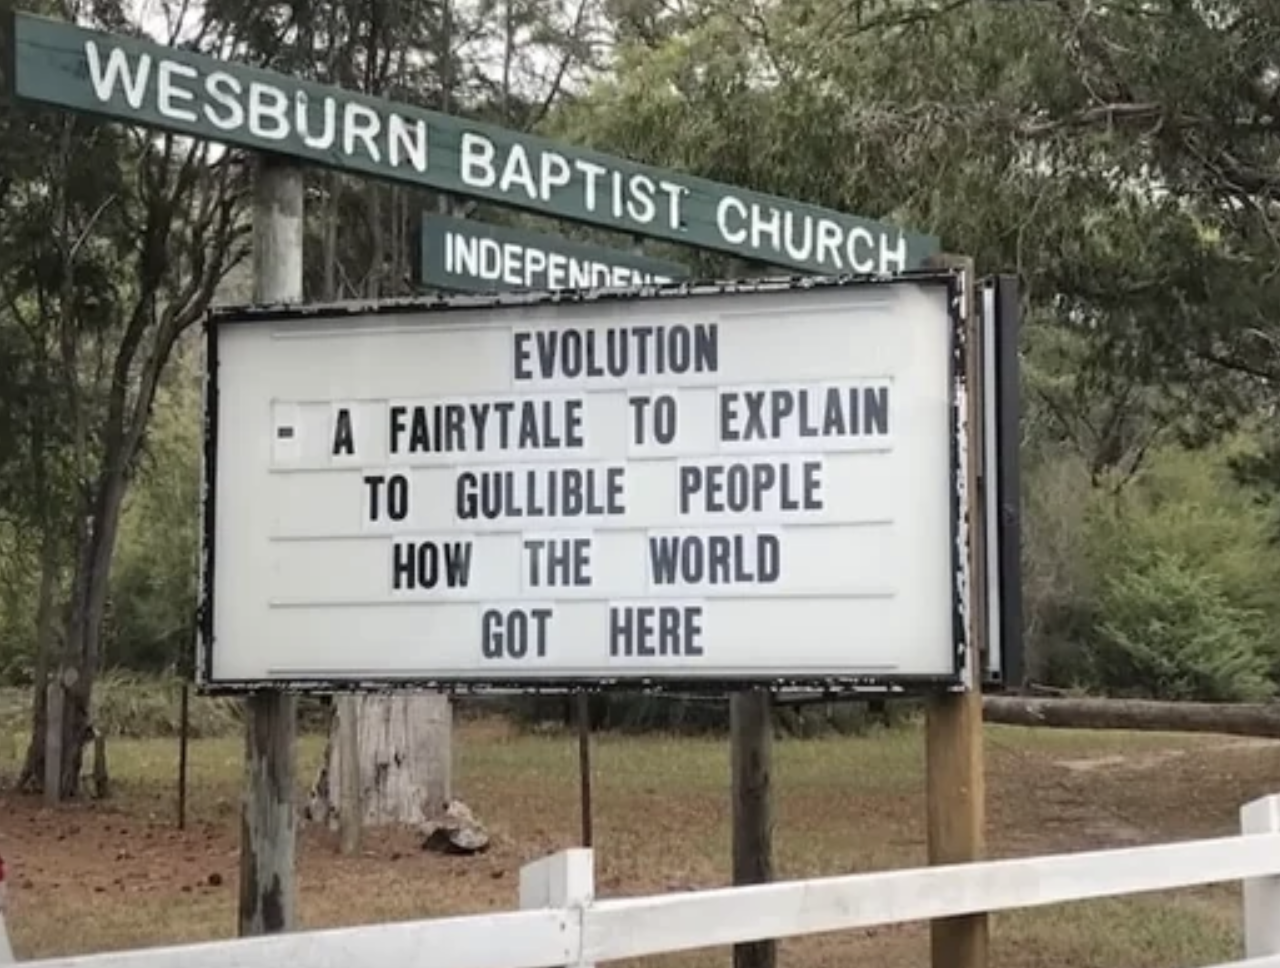 Facepalms - nature reserve - 410 Wesburn Baptist Church Independent Evolution A Fairytale To Explain To Gullible People How The World Got Here